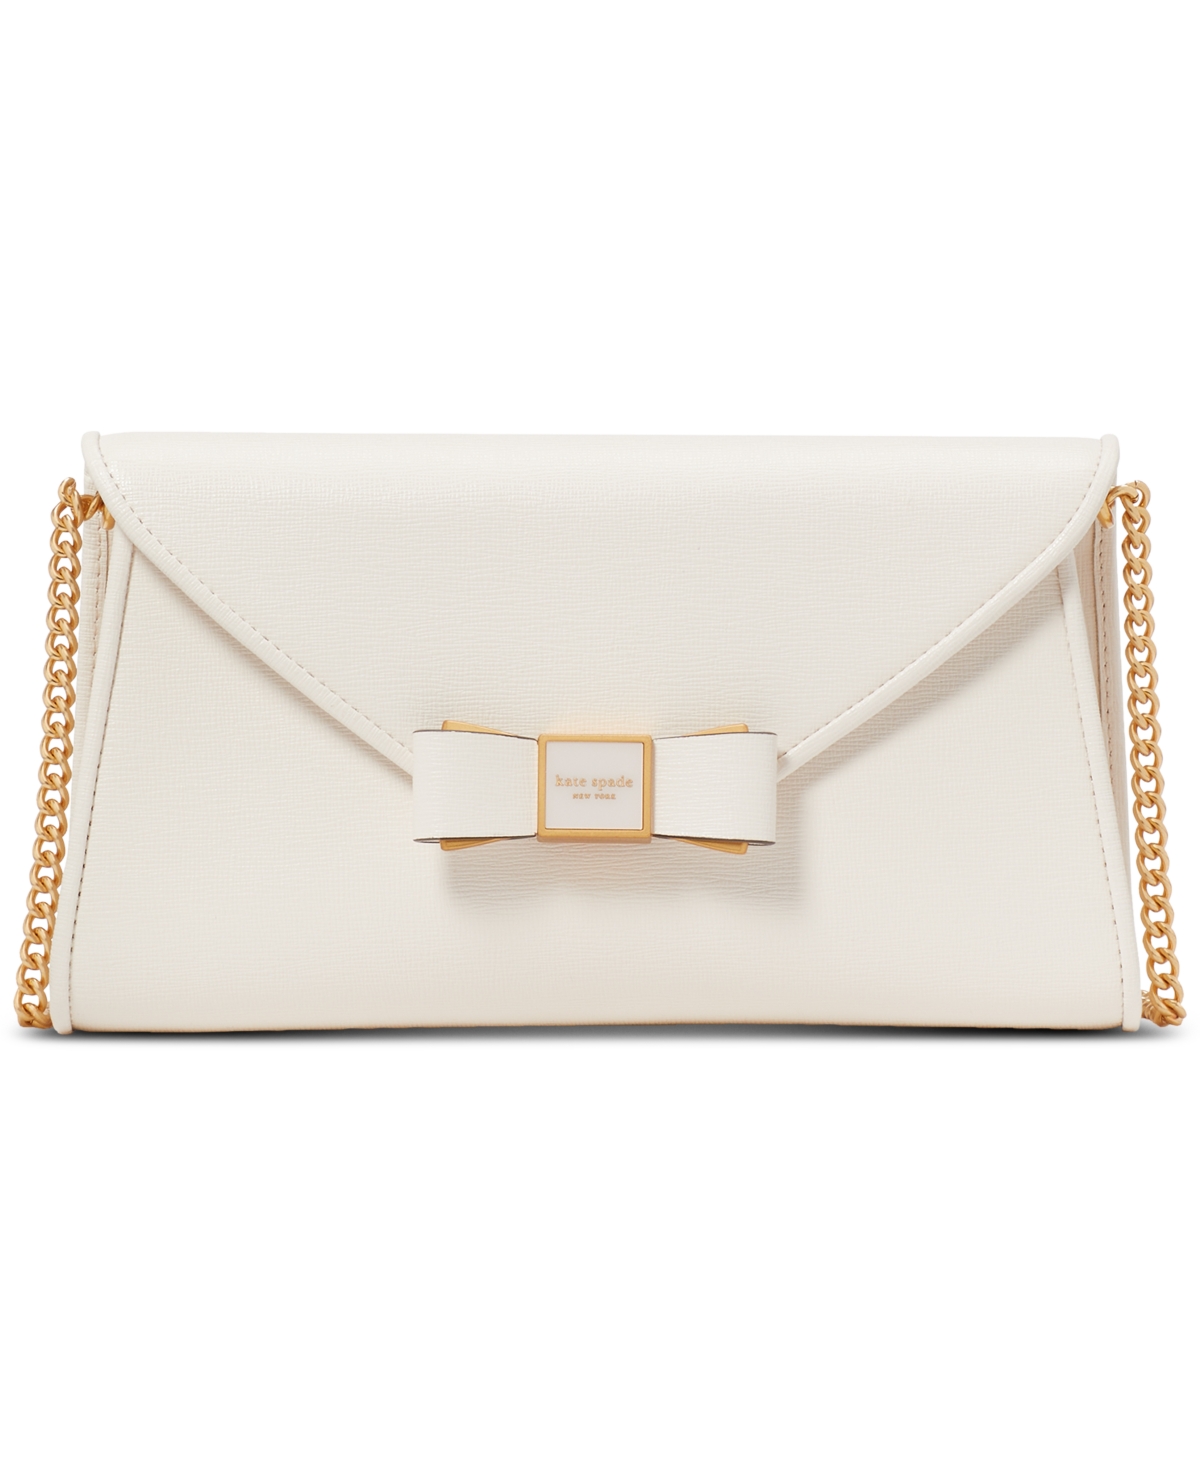 Morgan Bow Embellished Saffiano Leather Envelope Flap Small Crossbody - Parchment.